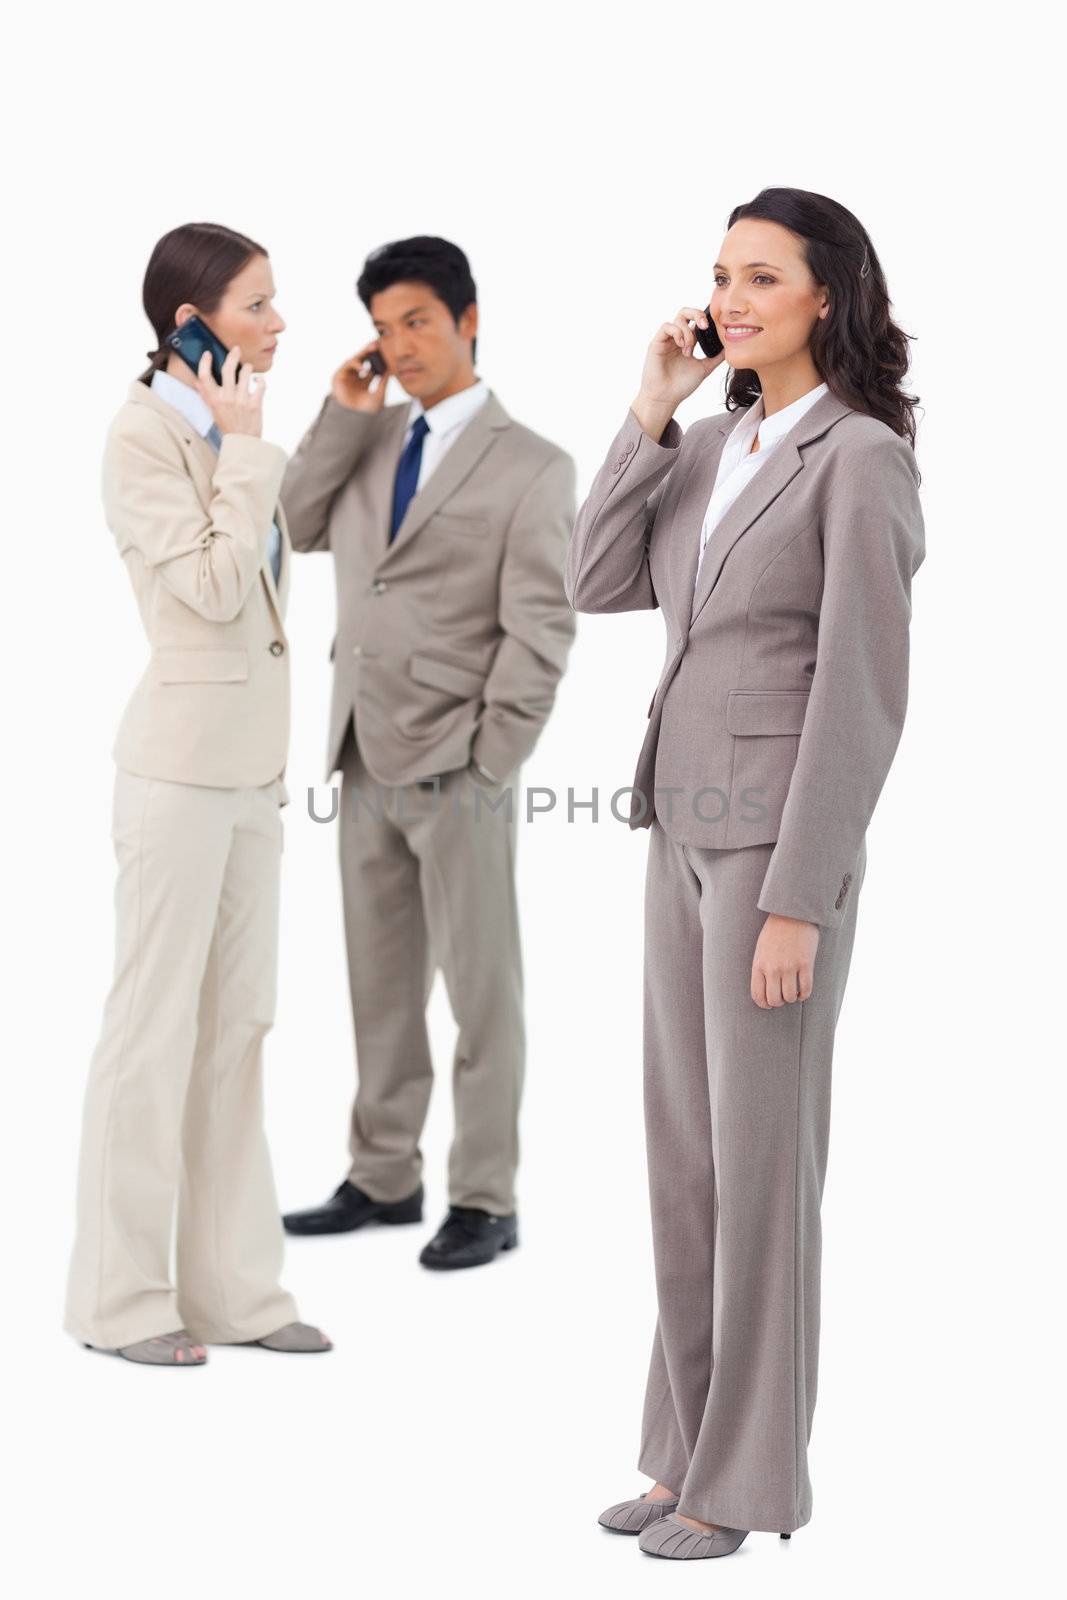 Salespeople on their phones against a white background